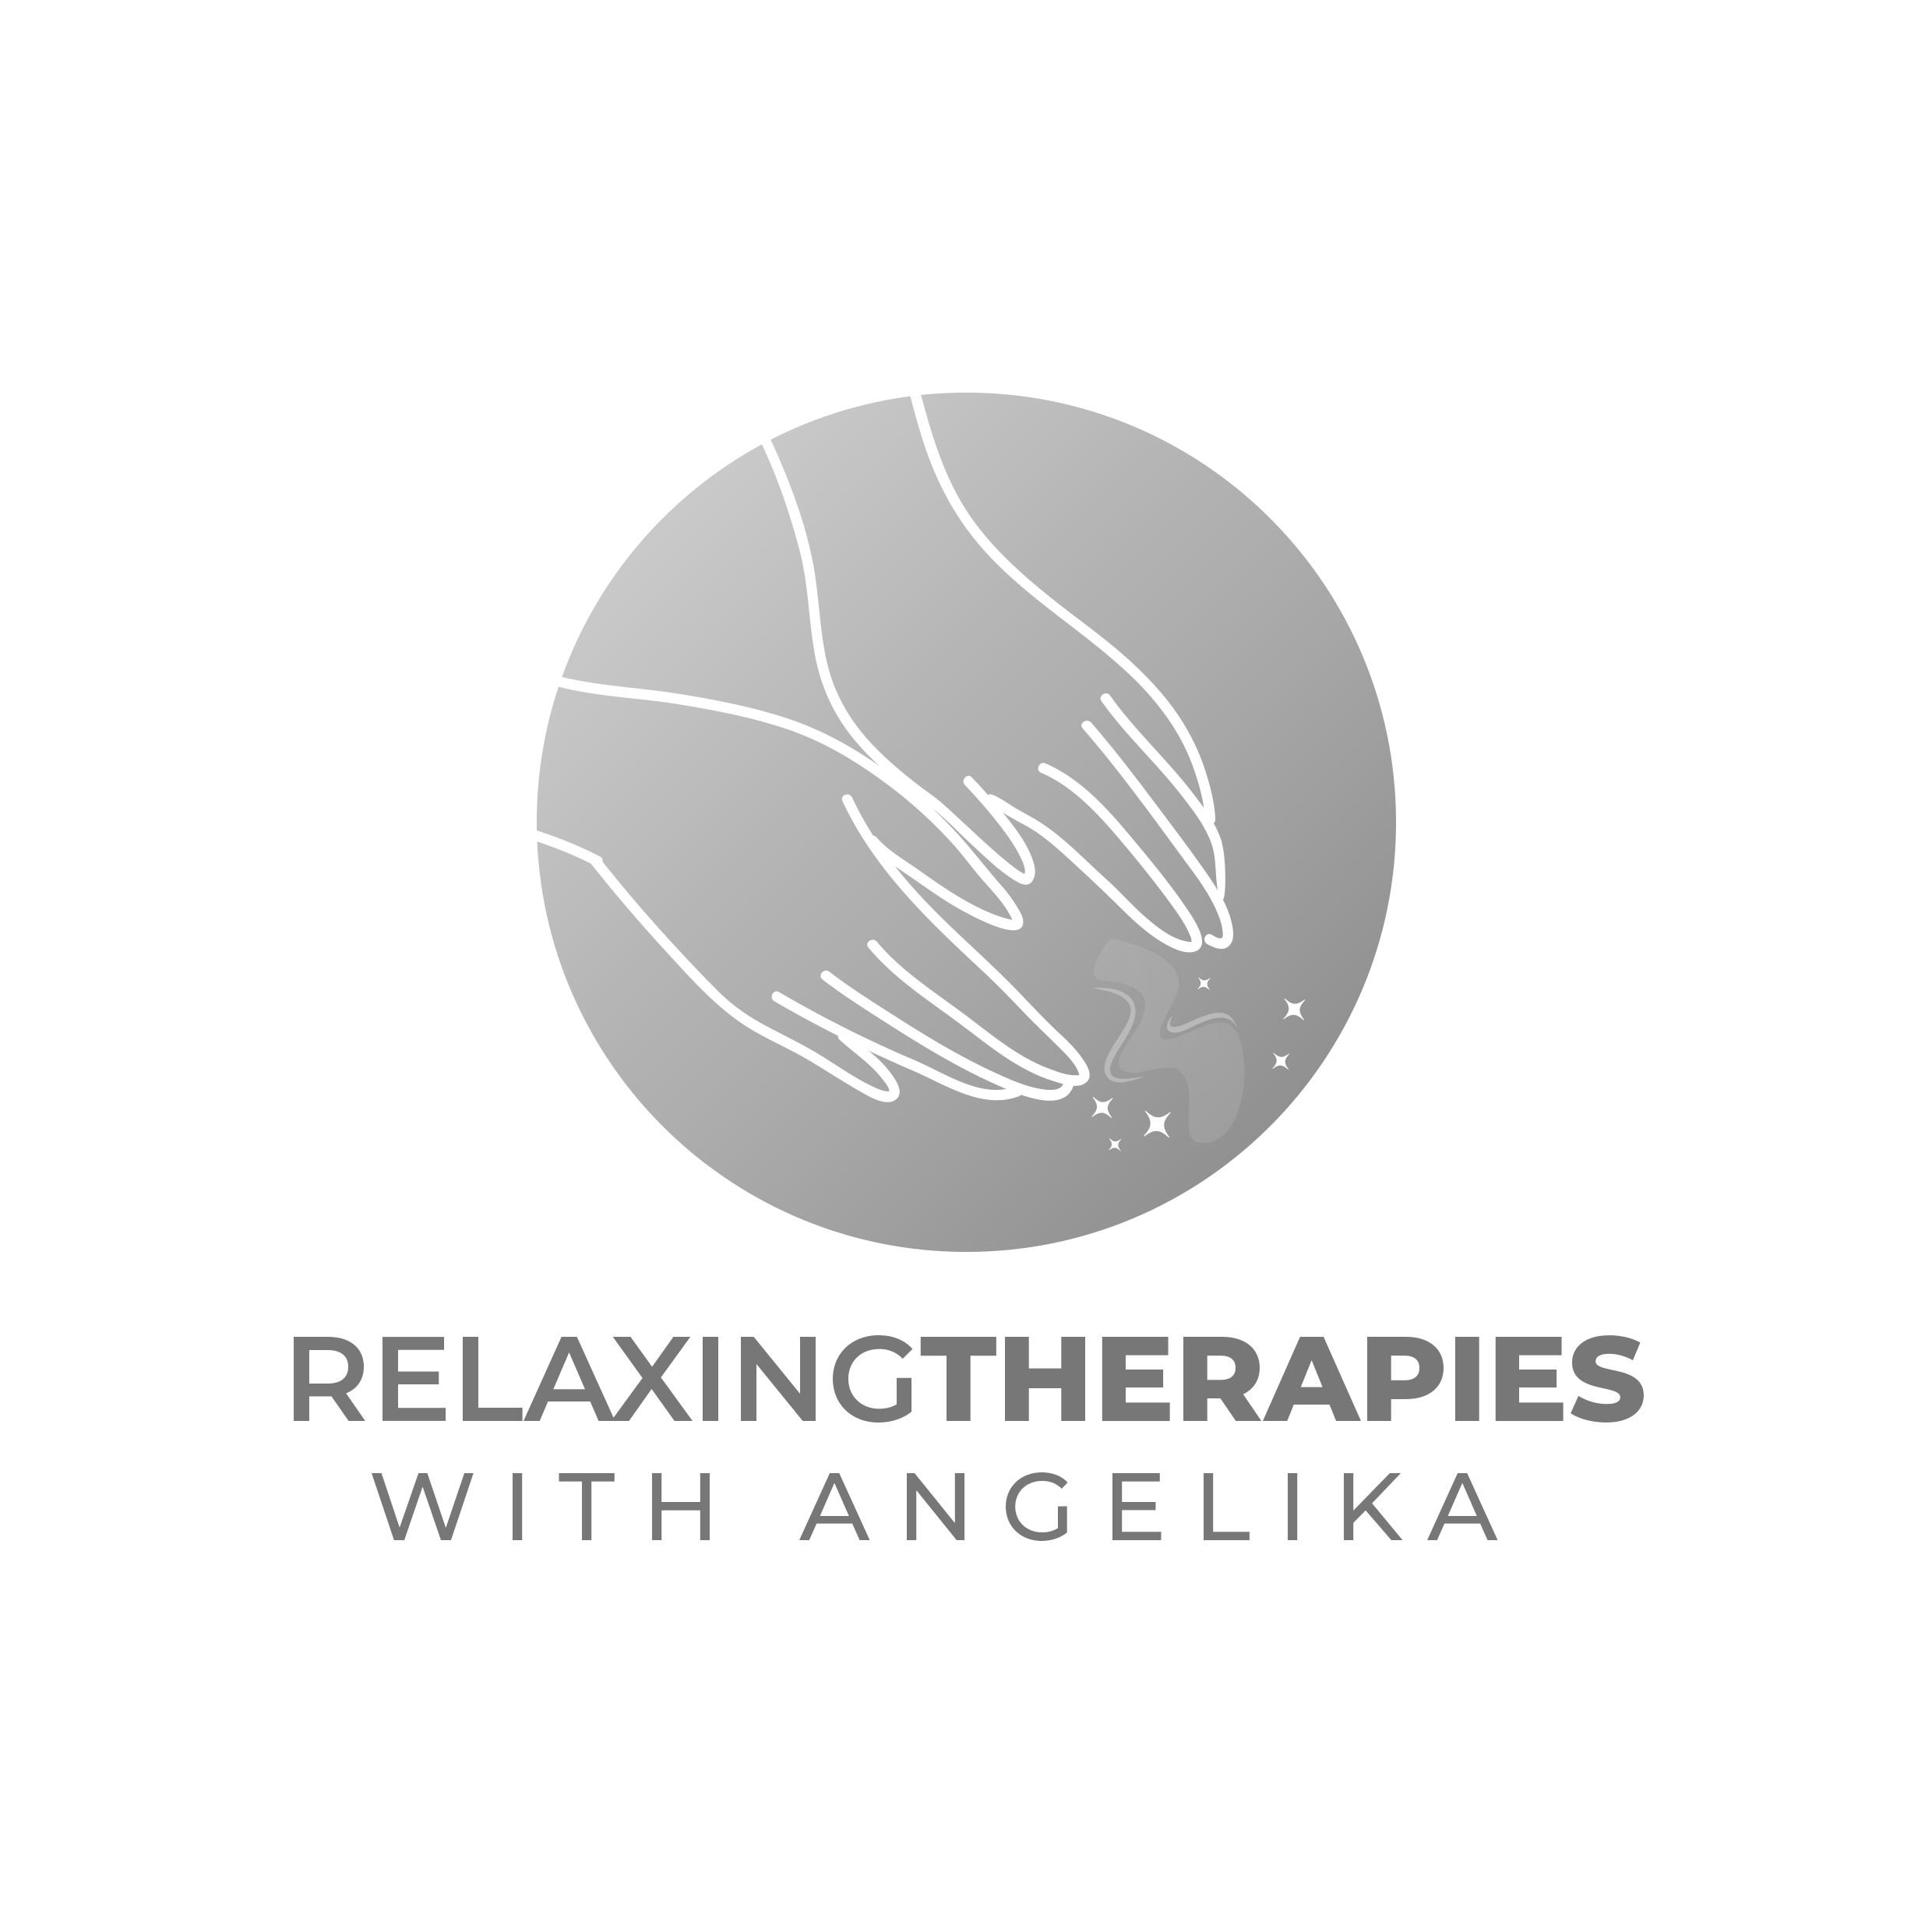 relaxing-therapies-1-1-1-1-1.png